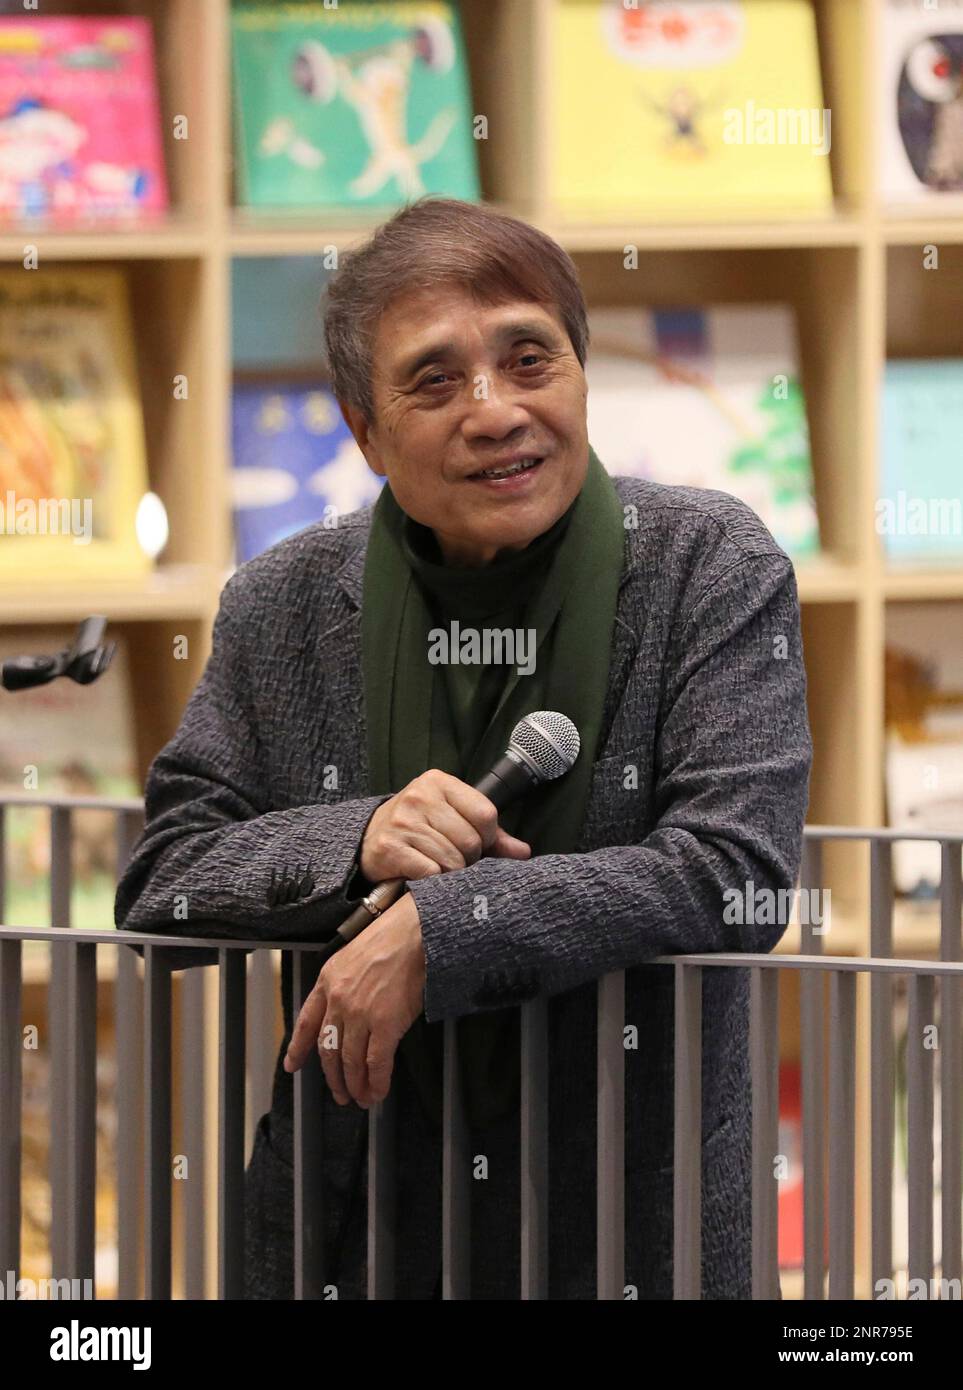 Japanese architect Tadao Ando speaks to media at Nakanoshima Children's Book Forest, which Ando designed and donated, in Osaka City, Osaka Prefecture on Feb. 29, 2020, one day before its opening. Approximately 25,000 books intended for babies to junior high school students are stored at 3-stories and 800-square-meter library. ( The Yomiuri Shimbun via AP Images ) Stockfoto